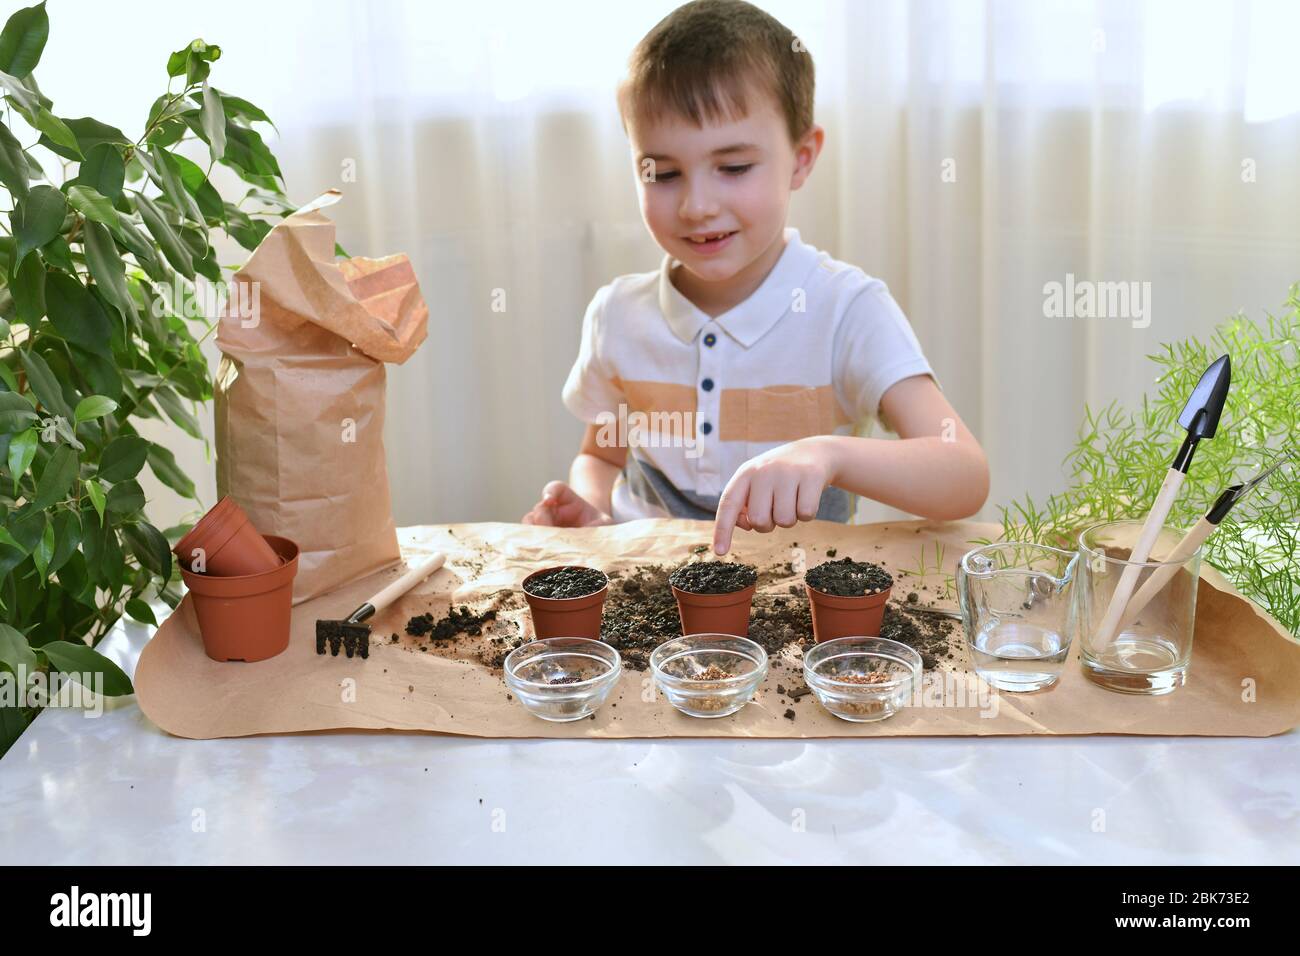 A child is busy planting seeds in pots. A boy with a happy smile points his finger at the pots with planted seeds. Stock Photo